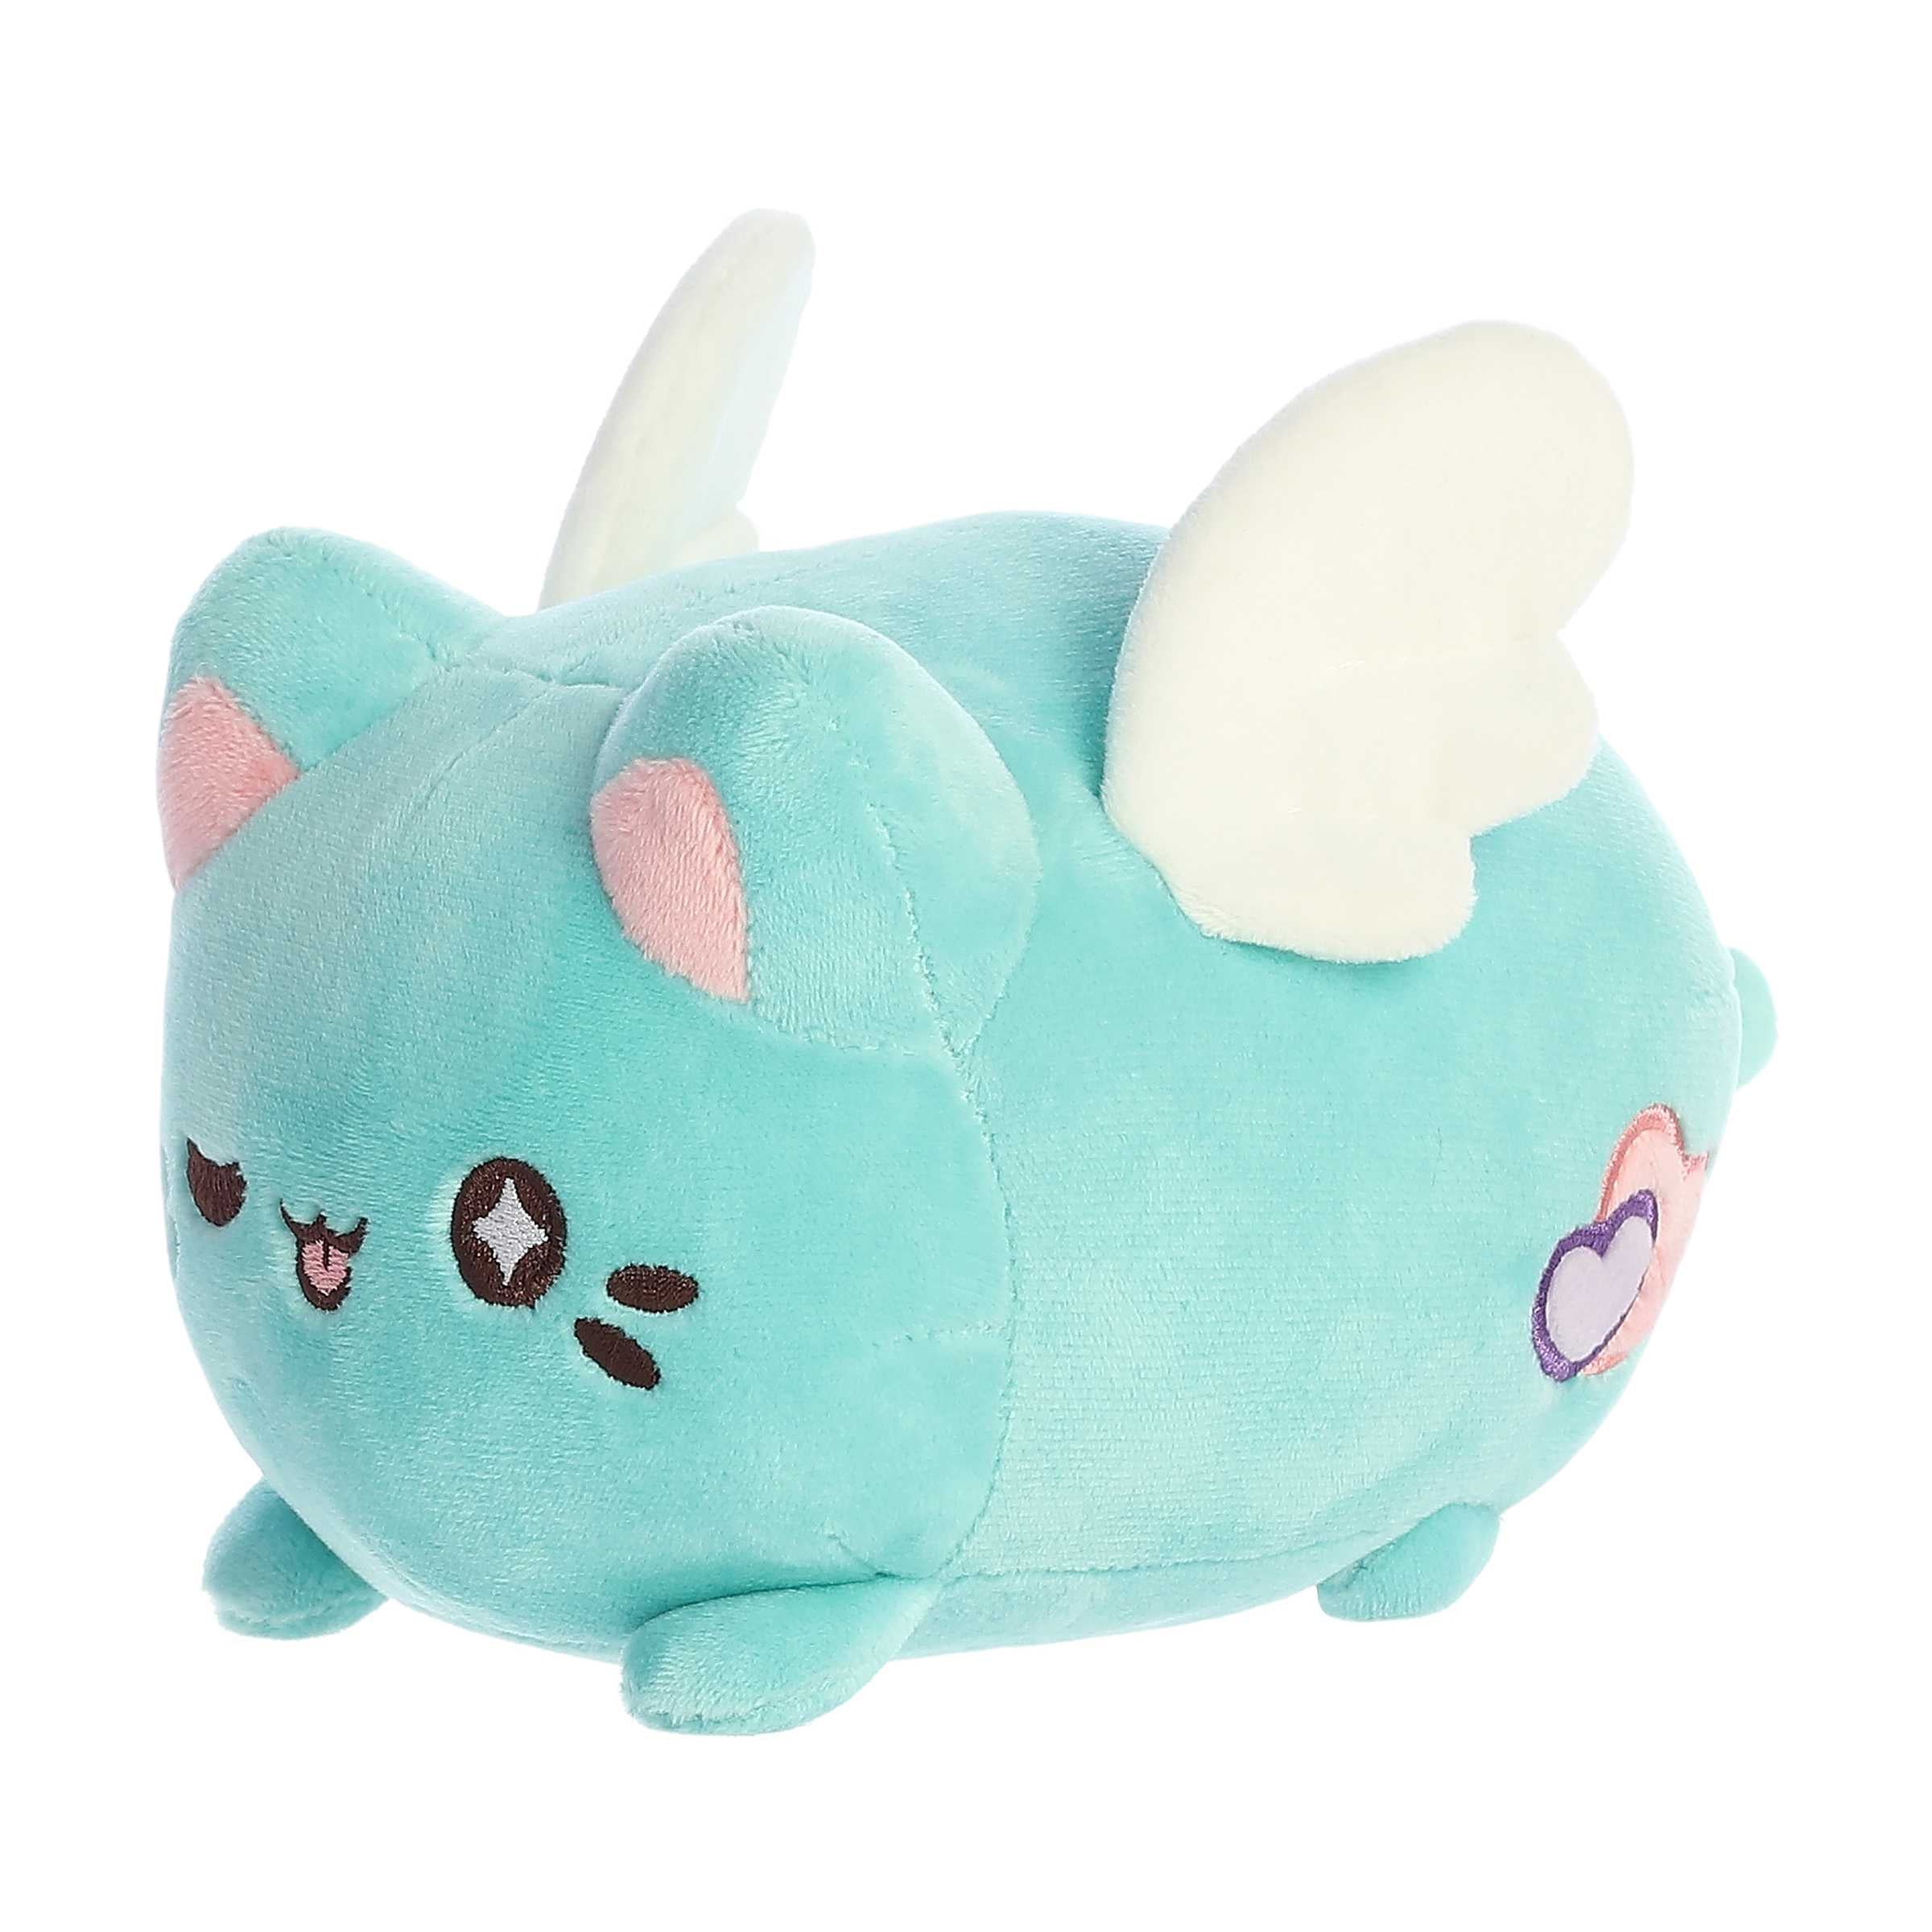 Mint Candy Heart Meowchi with white wings and pink ear accents. Soft mint-colored plush from Tasty Peach line by Aurora.